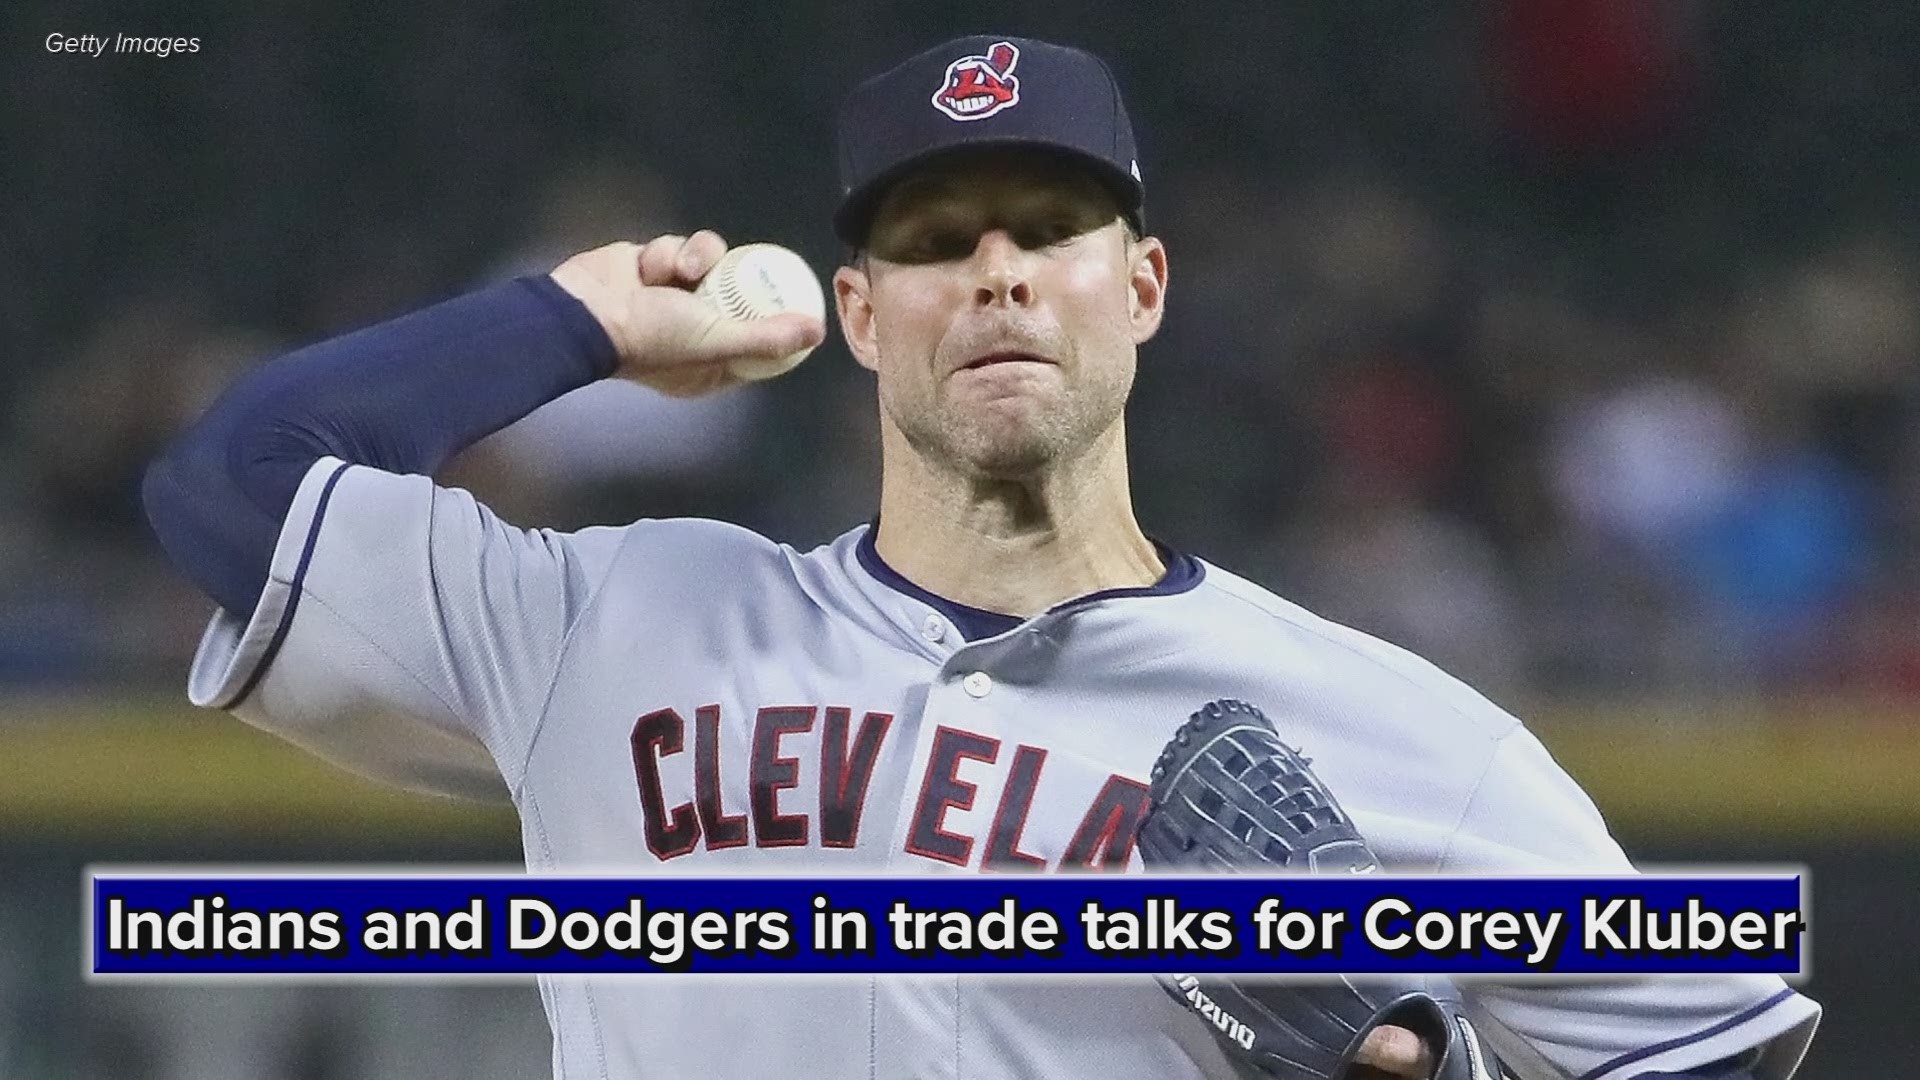 Indians and Dodgers in trade talks involving Corey Kluber